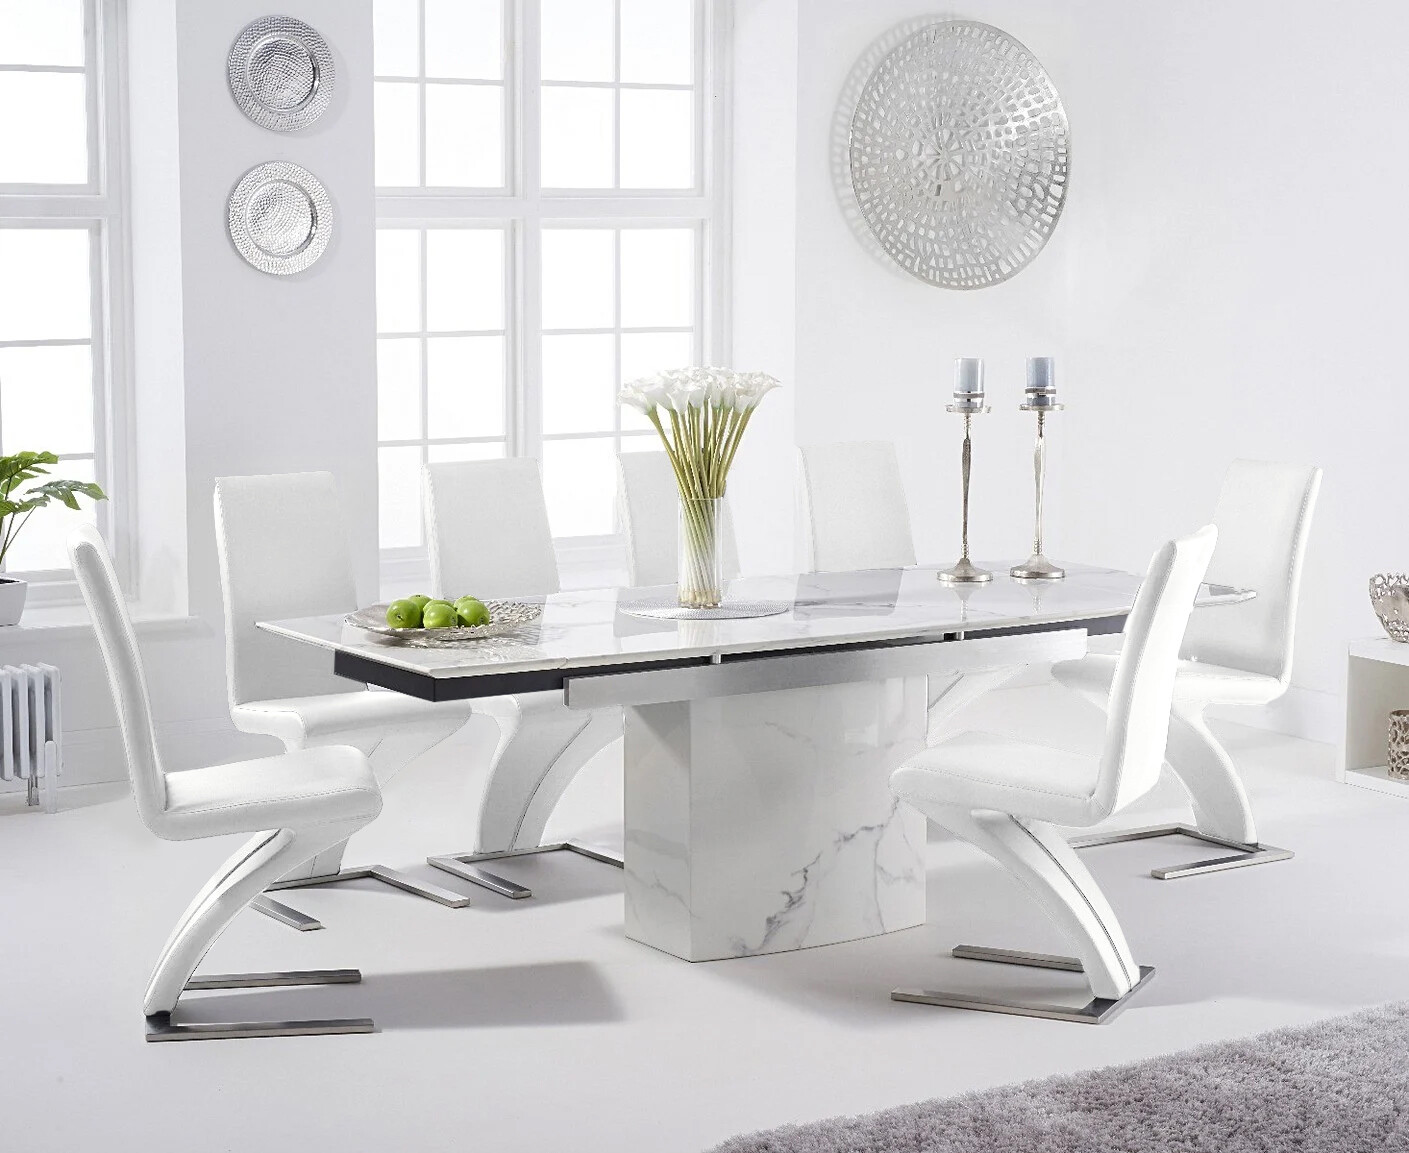 Extending Savona 160cm White Marble Dining Table With 8 White Aldo Chairs